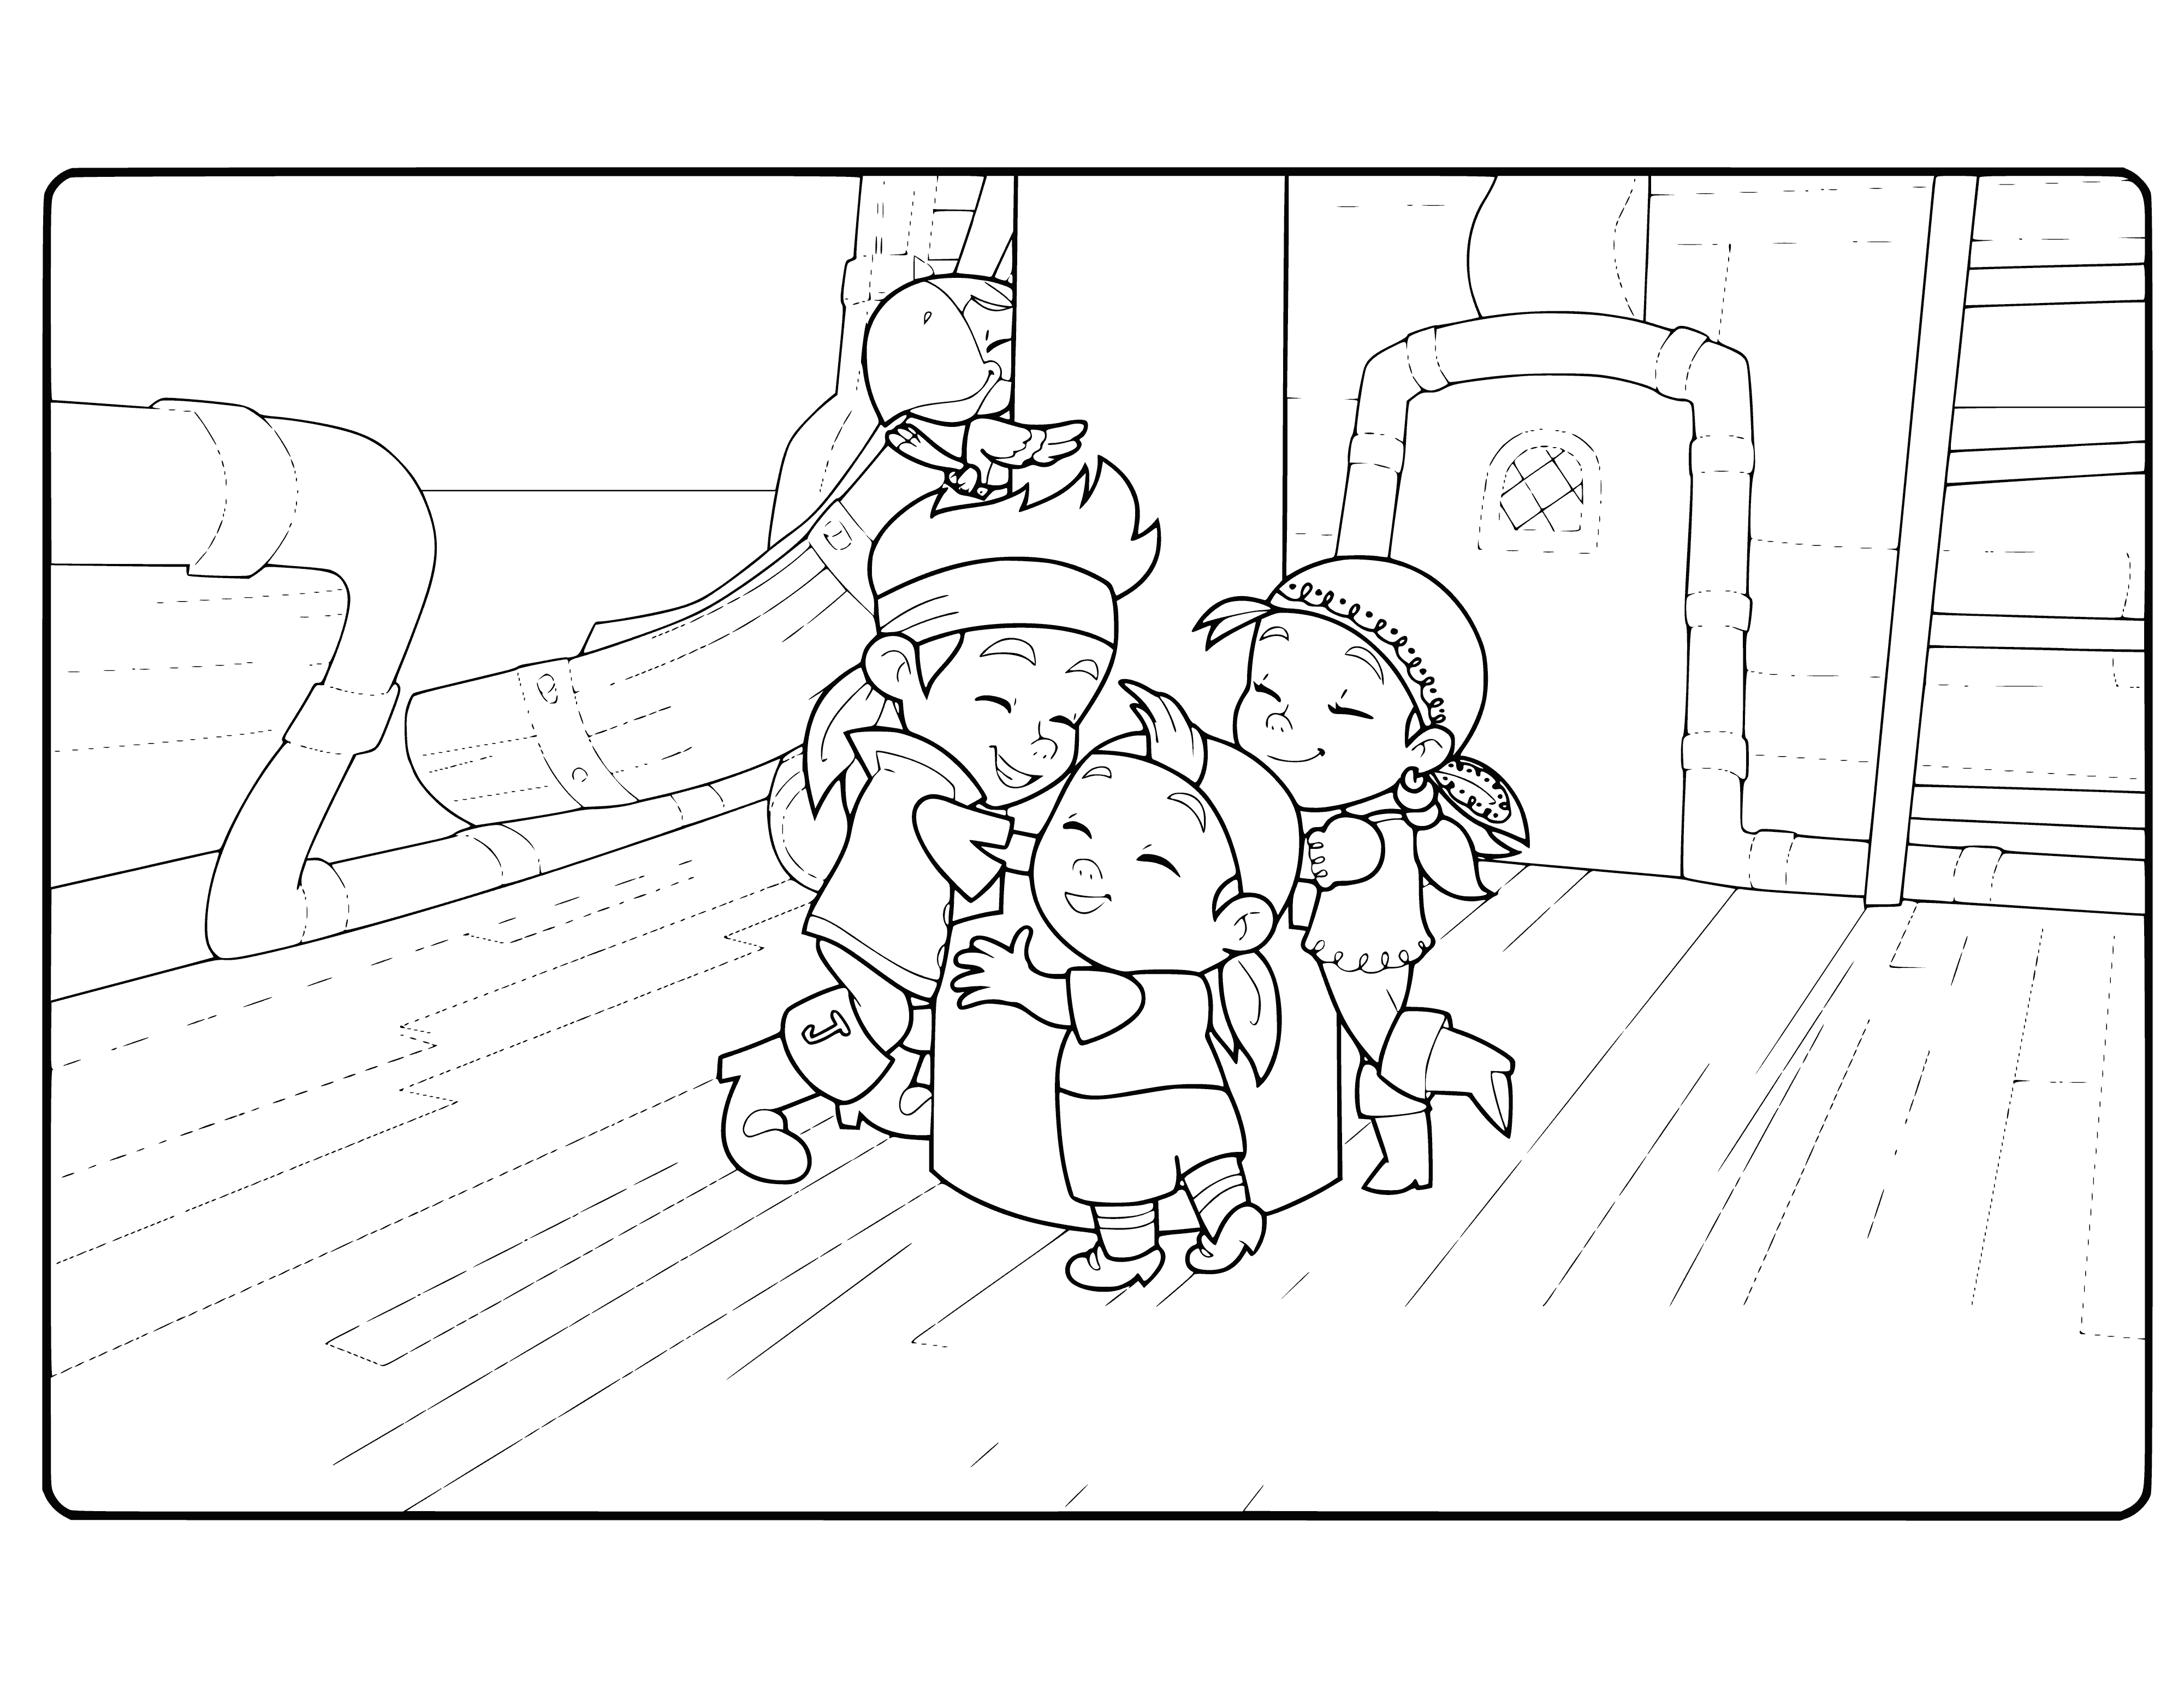 coloring page: Jake and friends explore an island and find a ship in this fun coloring page!